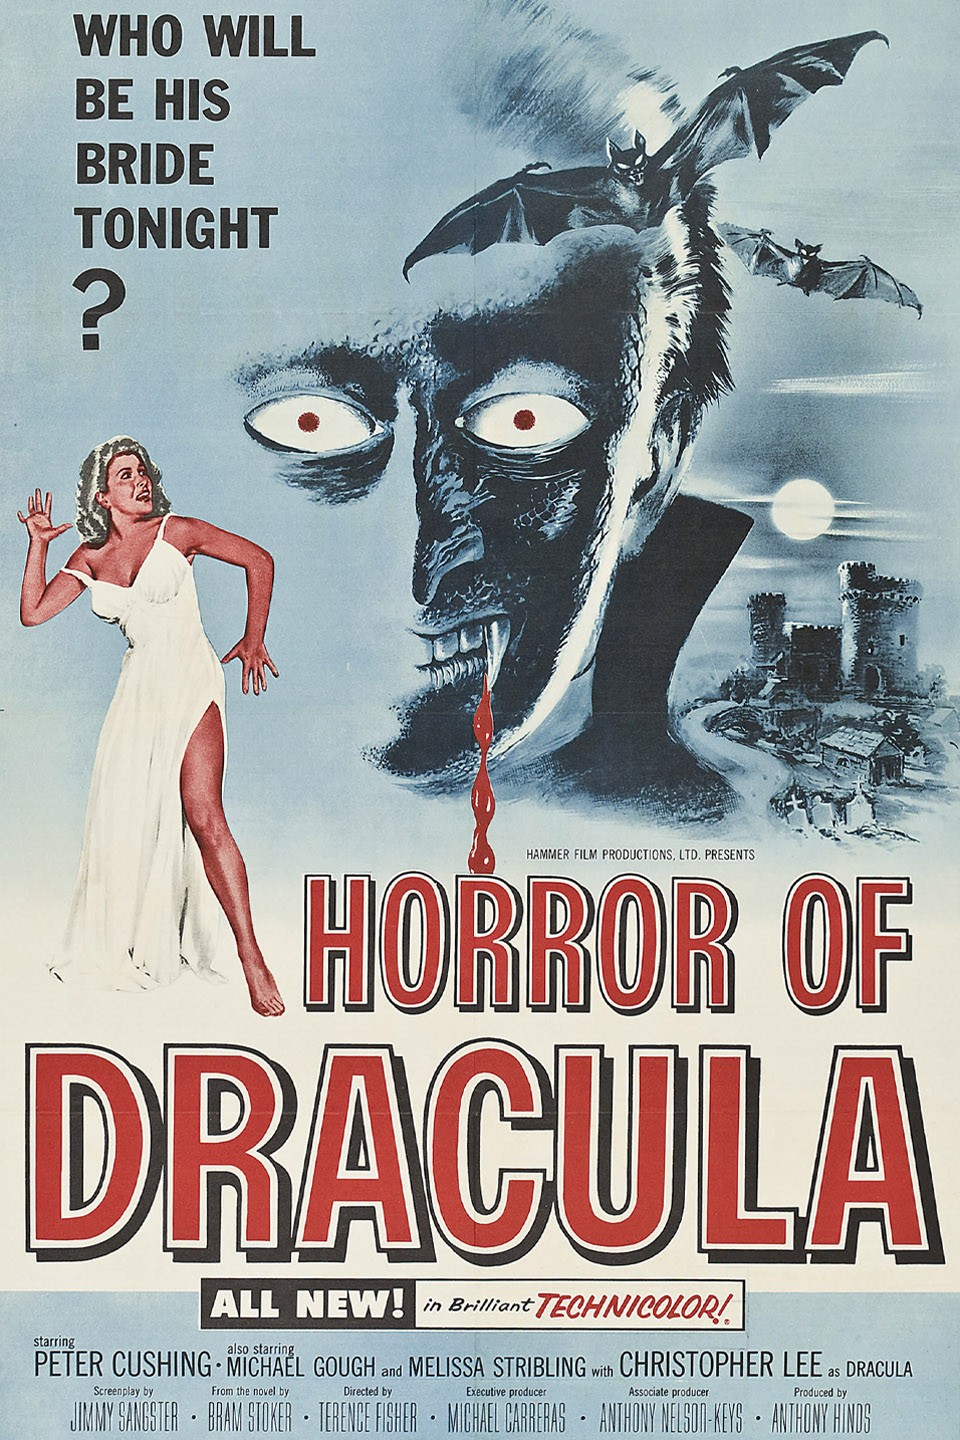 5 Dracula Kid Movies That The Whole Family Will Enjoy